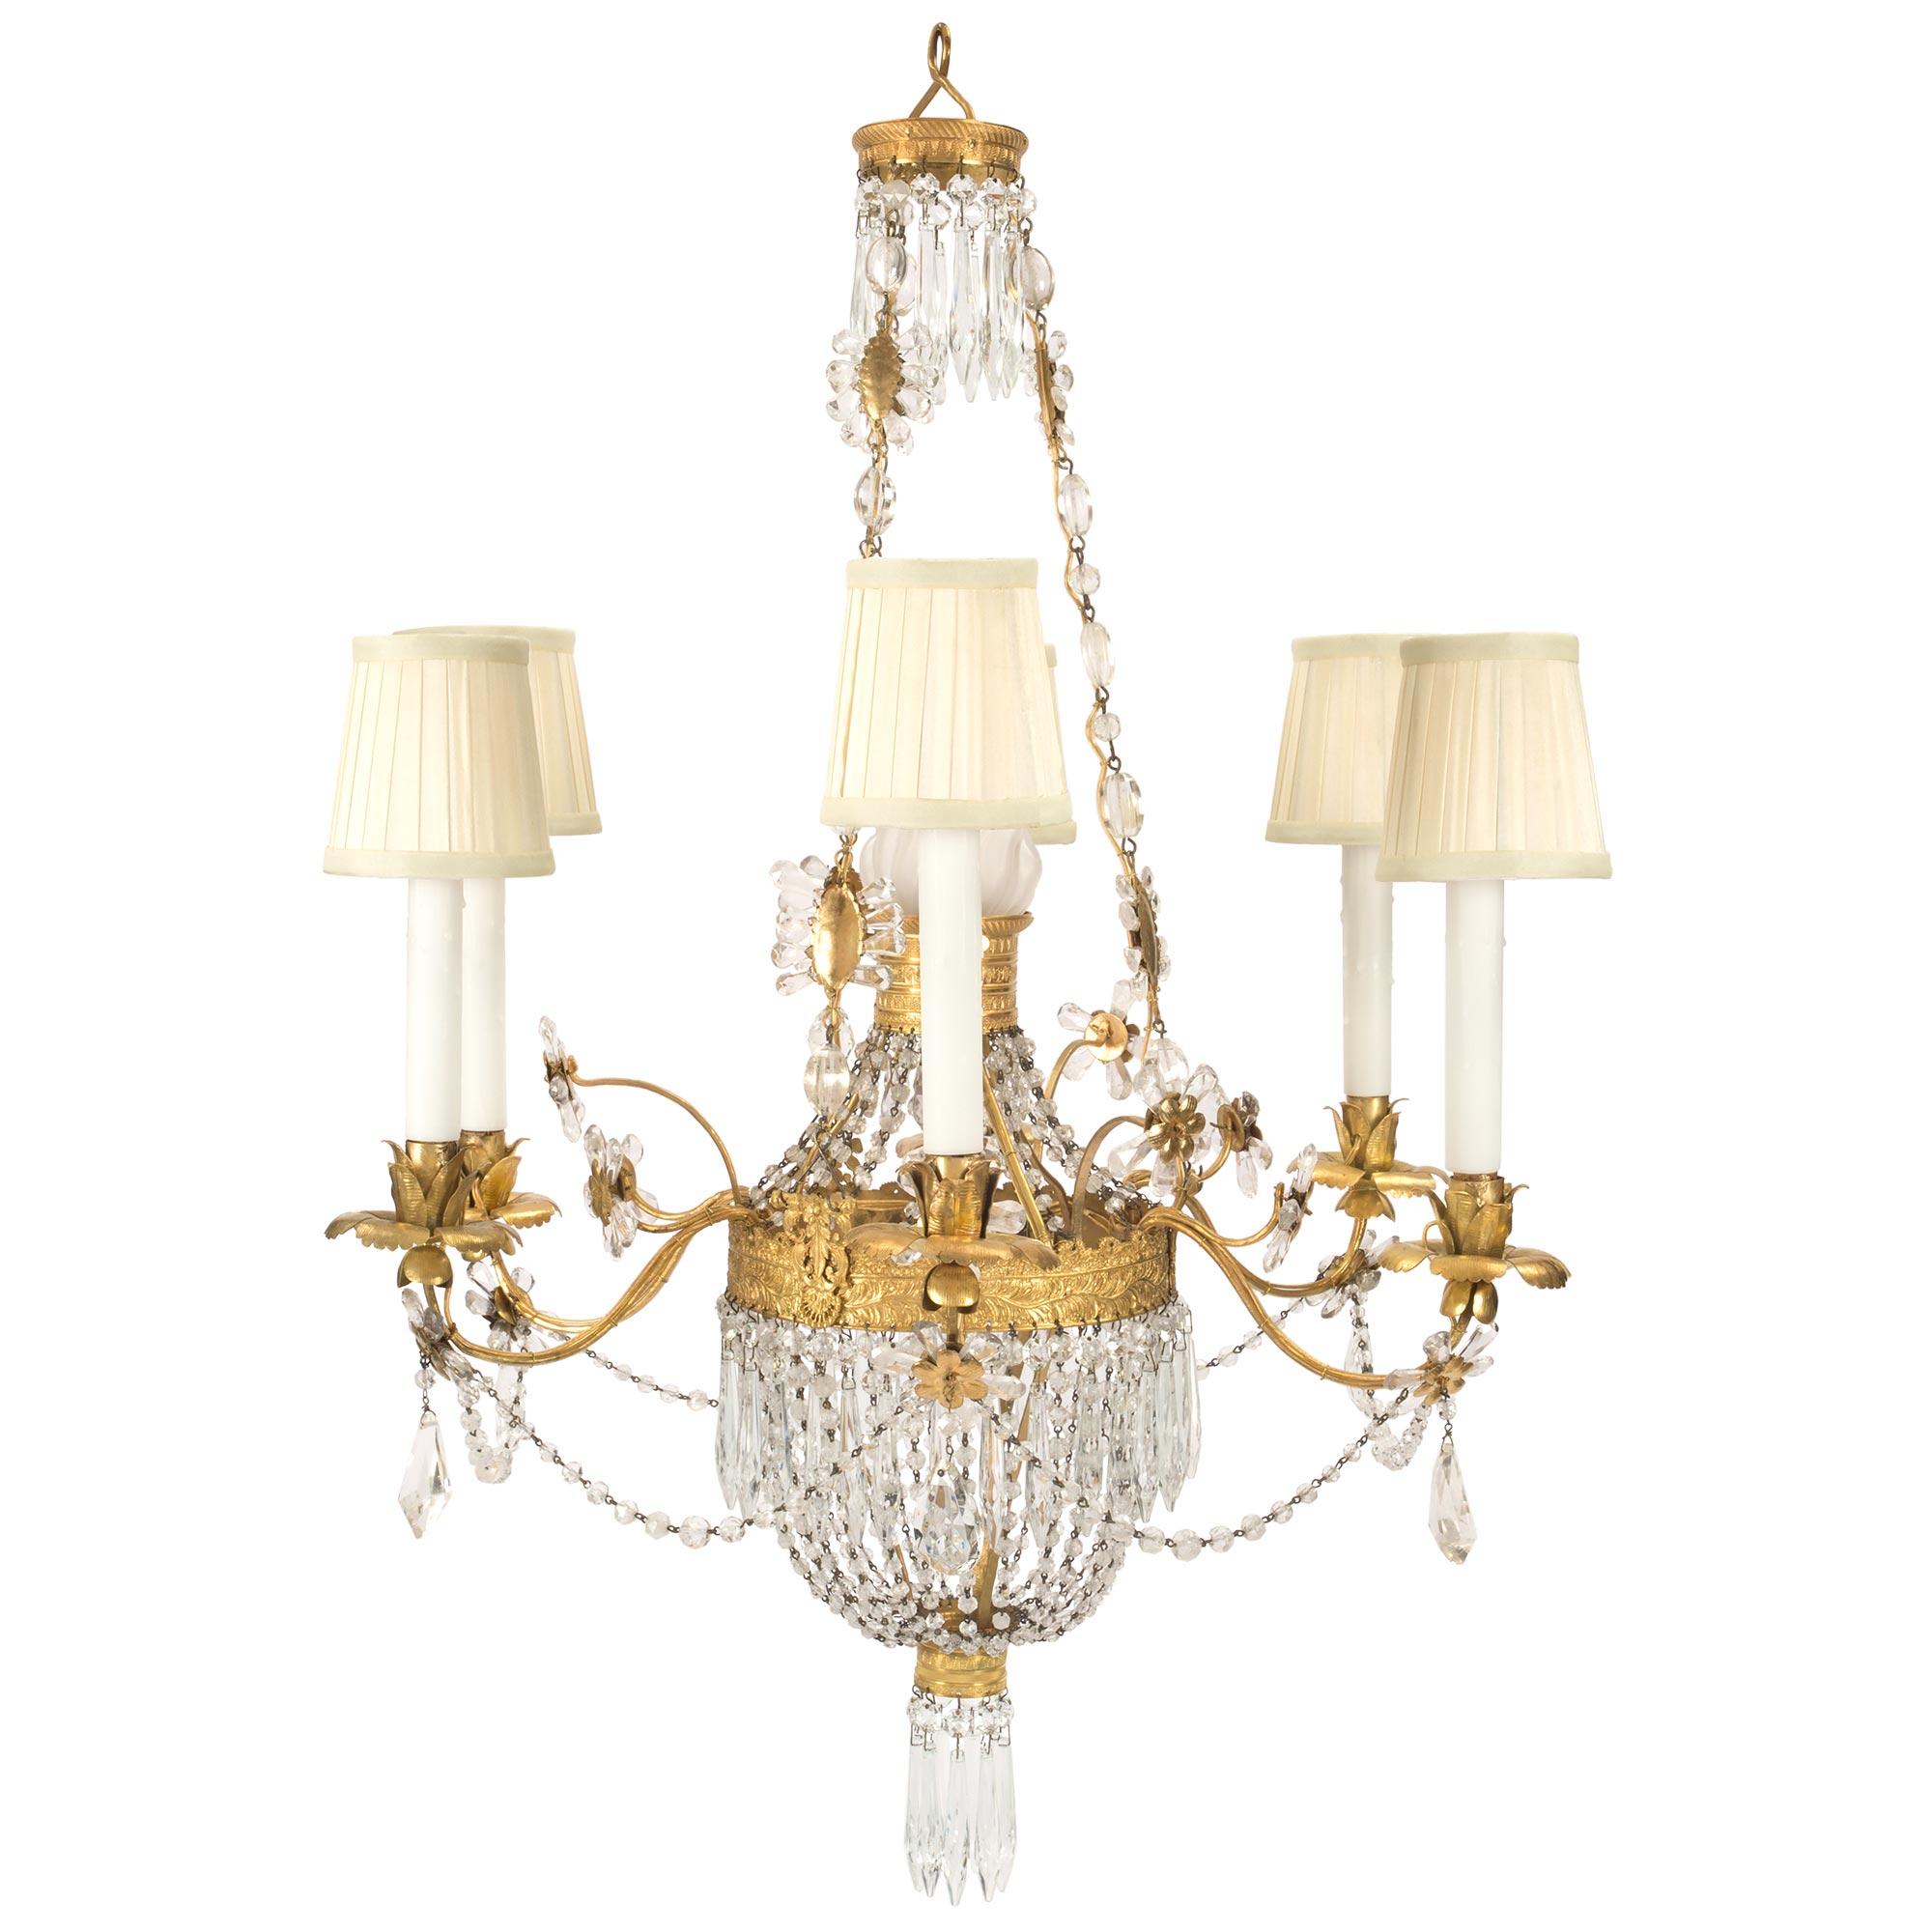 A stunning and very unique Italian early 19th century Louis XVI style rock crystal and gilt metal chandelier. At the bottom is a gilt metal finely chased base with hanging pendants. Crystal garlands join to the central gilt metal support with